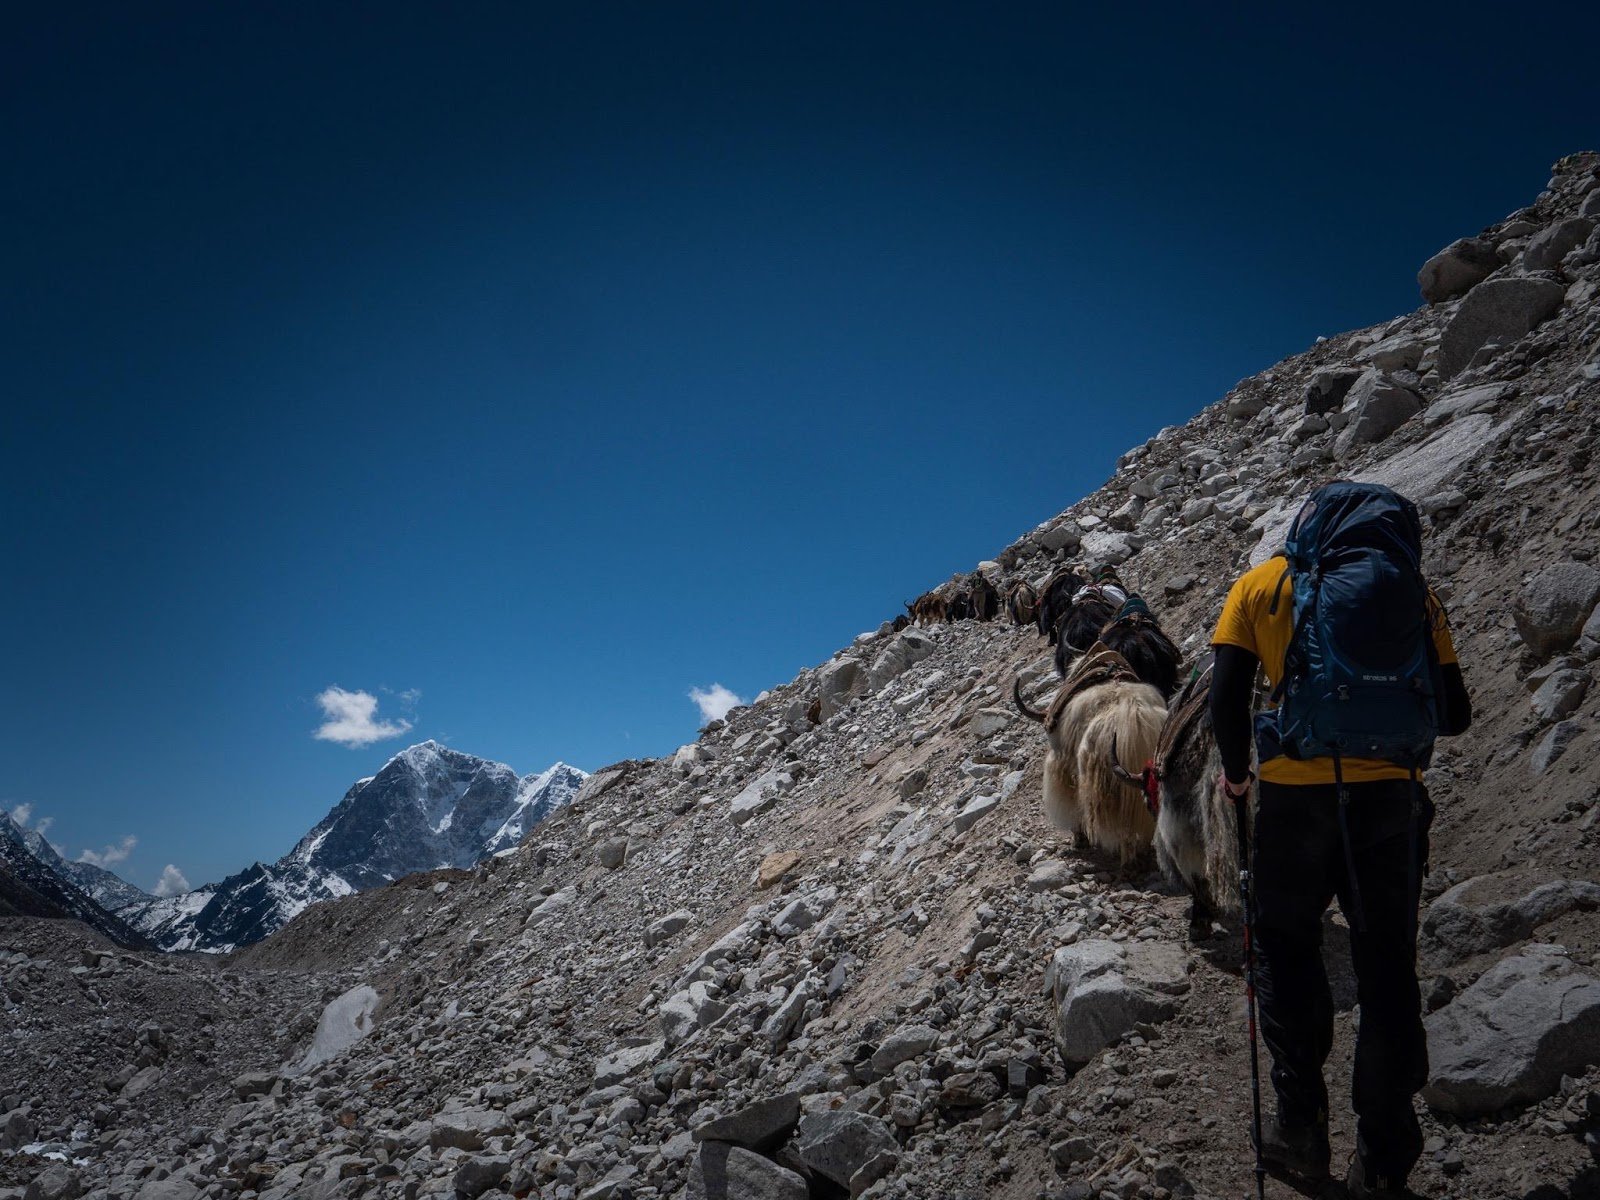 Yaks and hikers on the trail towards Everest Base Camp